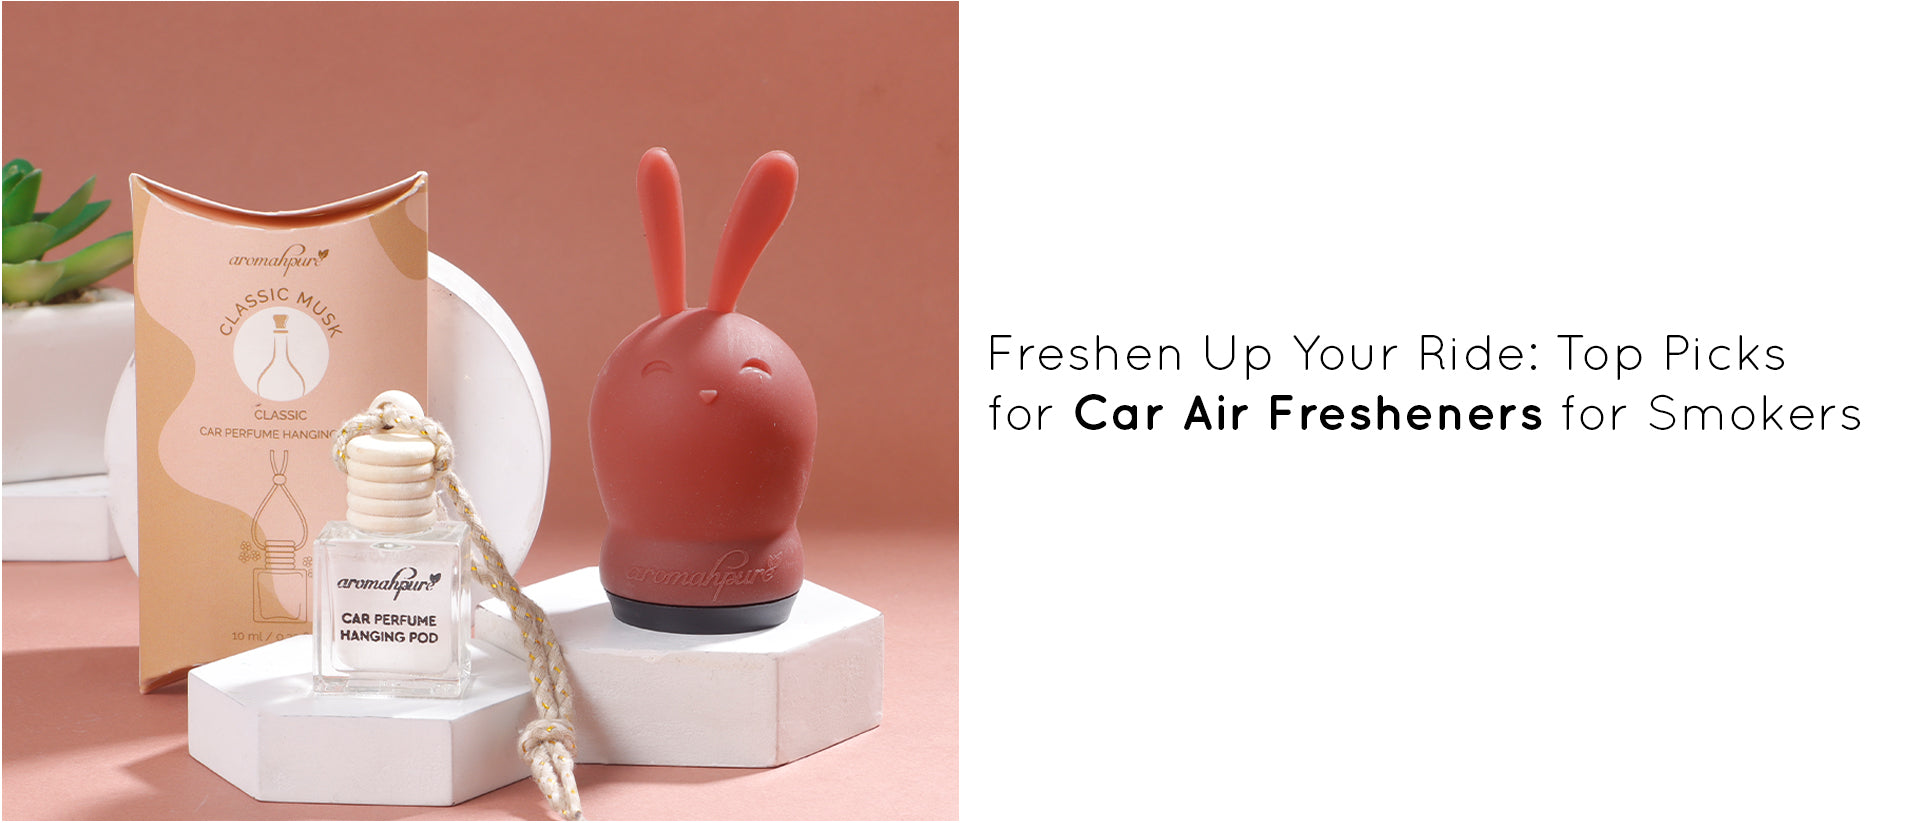 Freshen Up Your Ride: Top Picks for Car Air Fresheners for Smokers